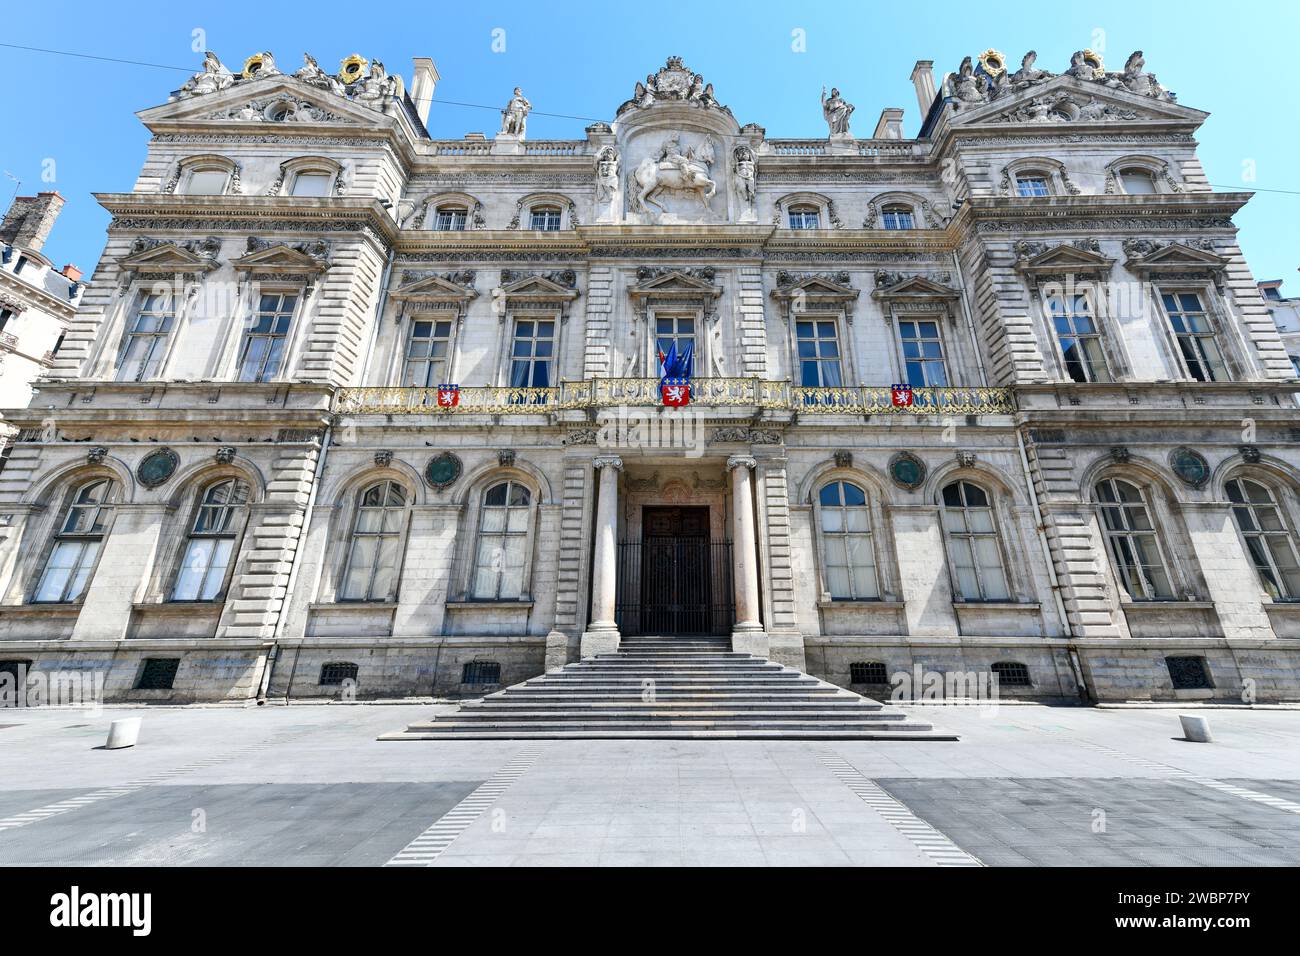 Hotel de Ville of Lyon, France. The city hall of Lyon, France, and one of the largest historic buildings in the city. Stock Photo